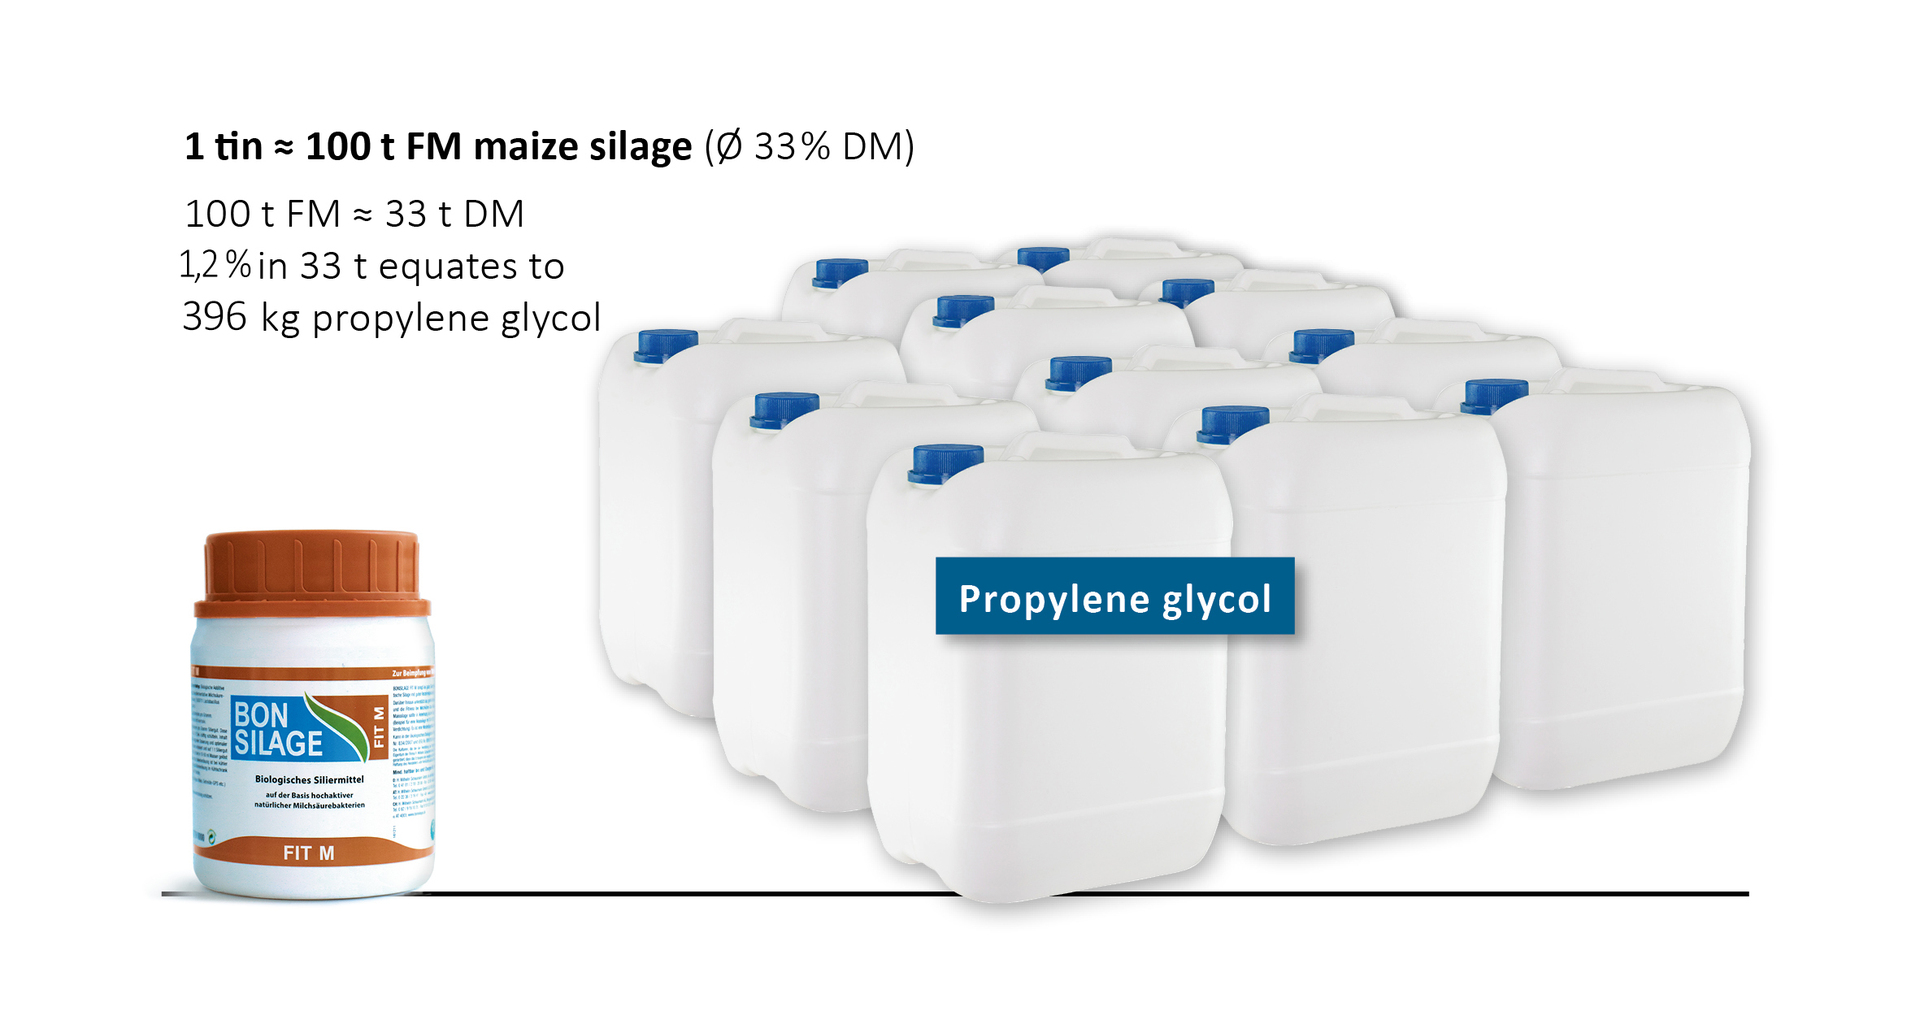 One tub of BONSILAGE FIT M produces 11 canisters of propylene glycol